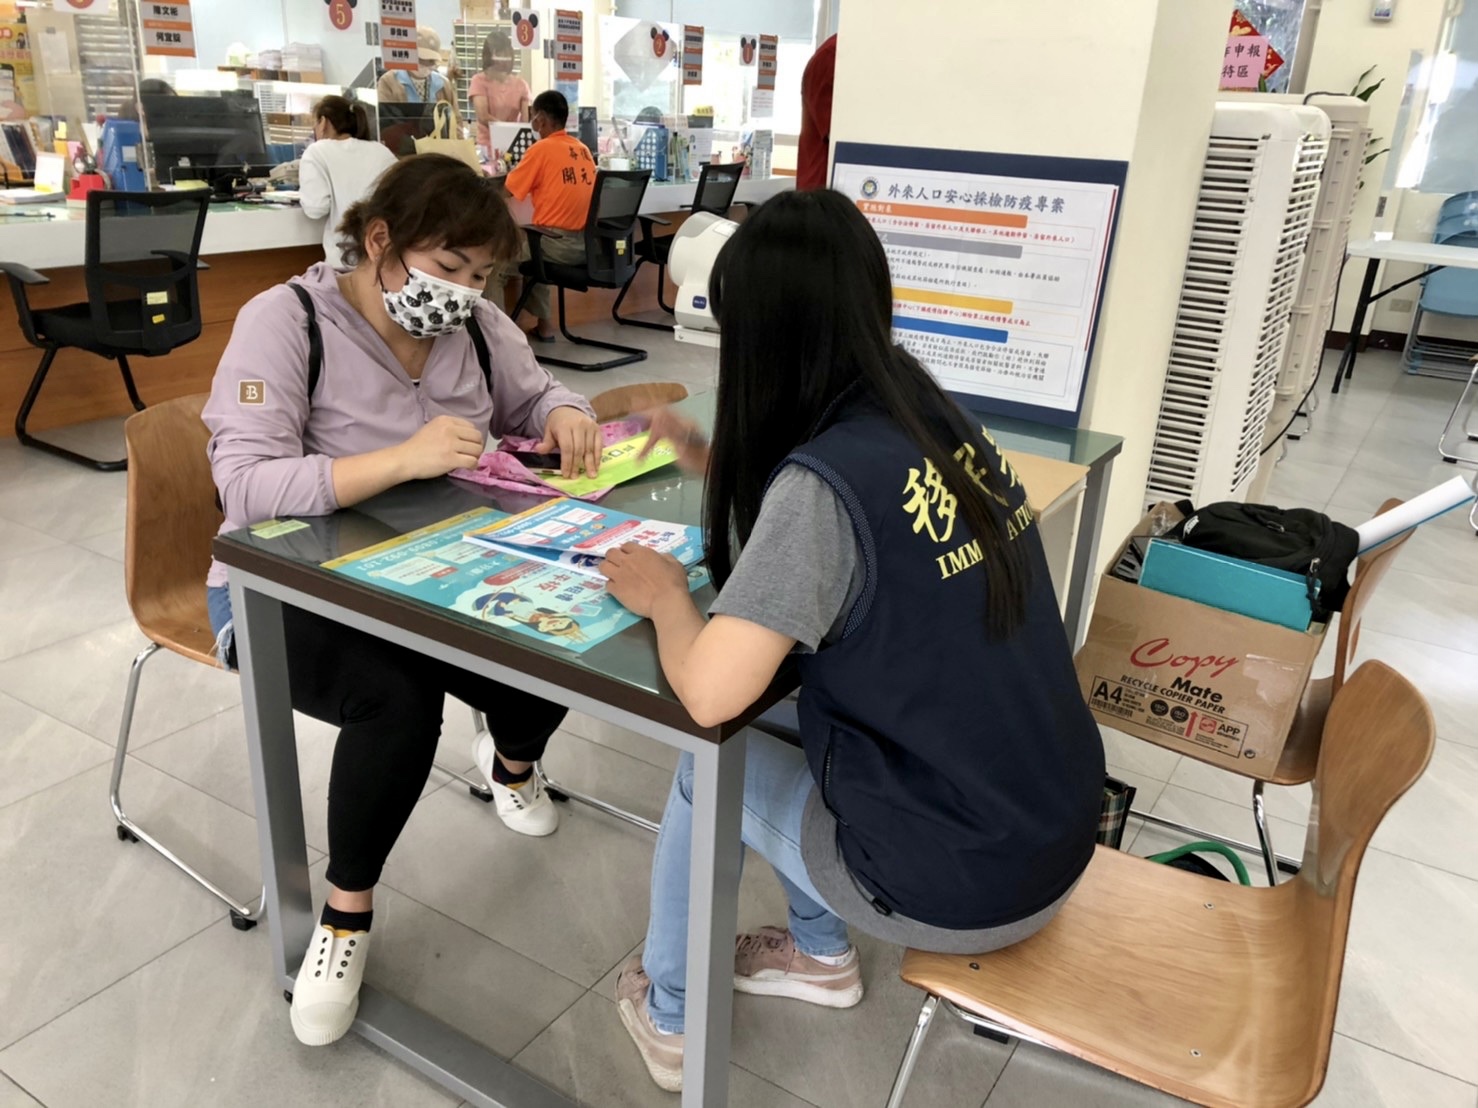 The NIA continuously provides support and help to new immigrants during the epidemic. (Photo / Provided by the NIA Yunlin County Service Center)